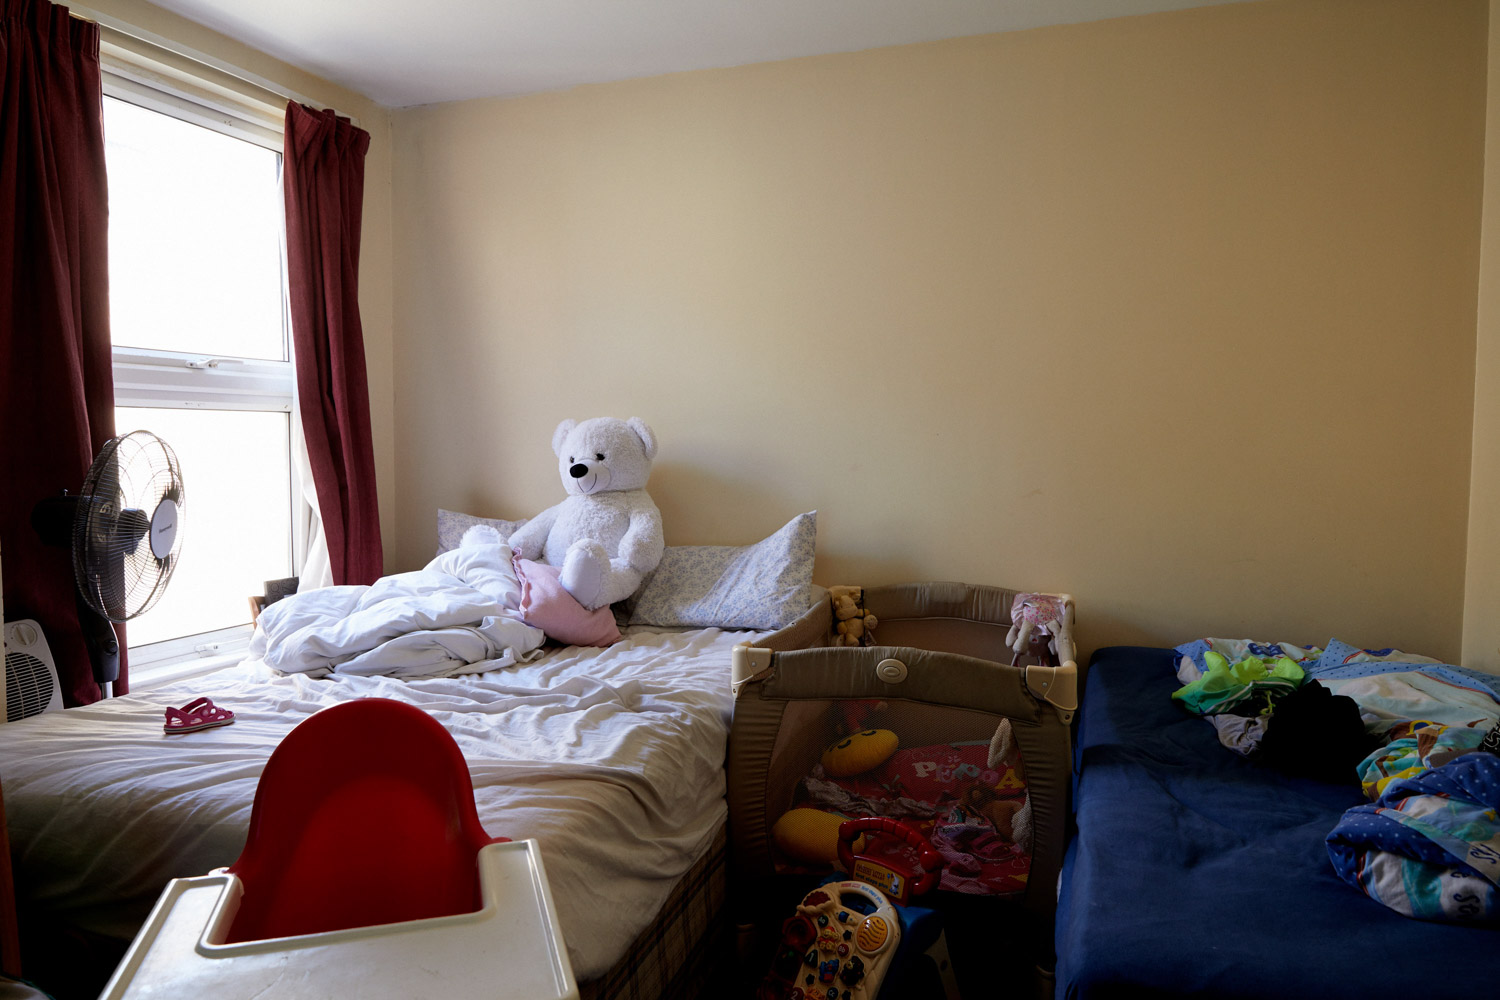   Rory and Vanessa   Six-year-old Rory has behavioural issues. He is in year one at school and has already been suspended. He sleeps in the blue bed next to his sister and their mum in this one room accommodation.  Social Services moved them in two y